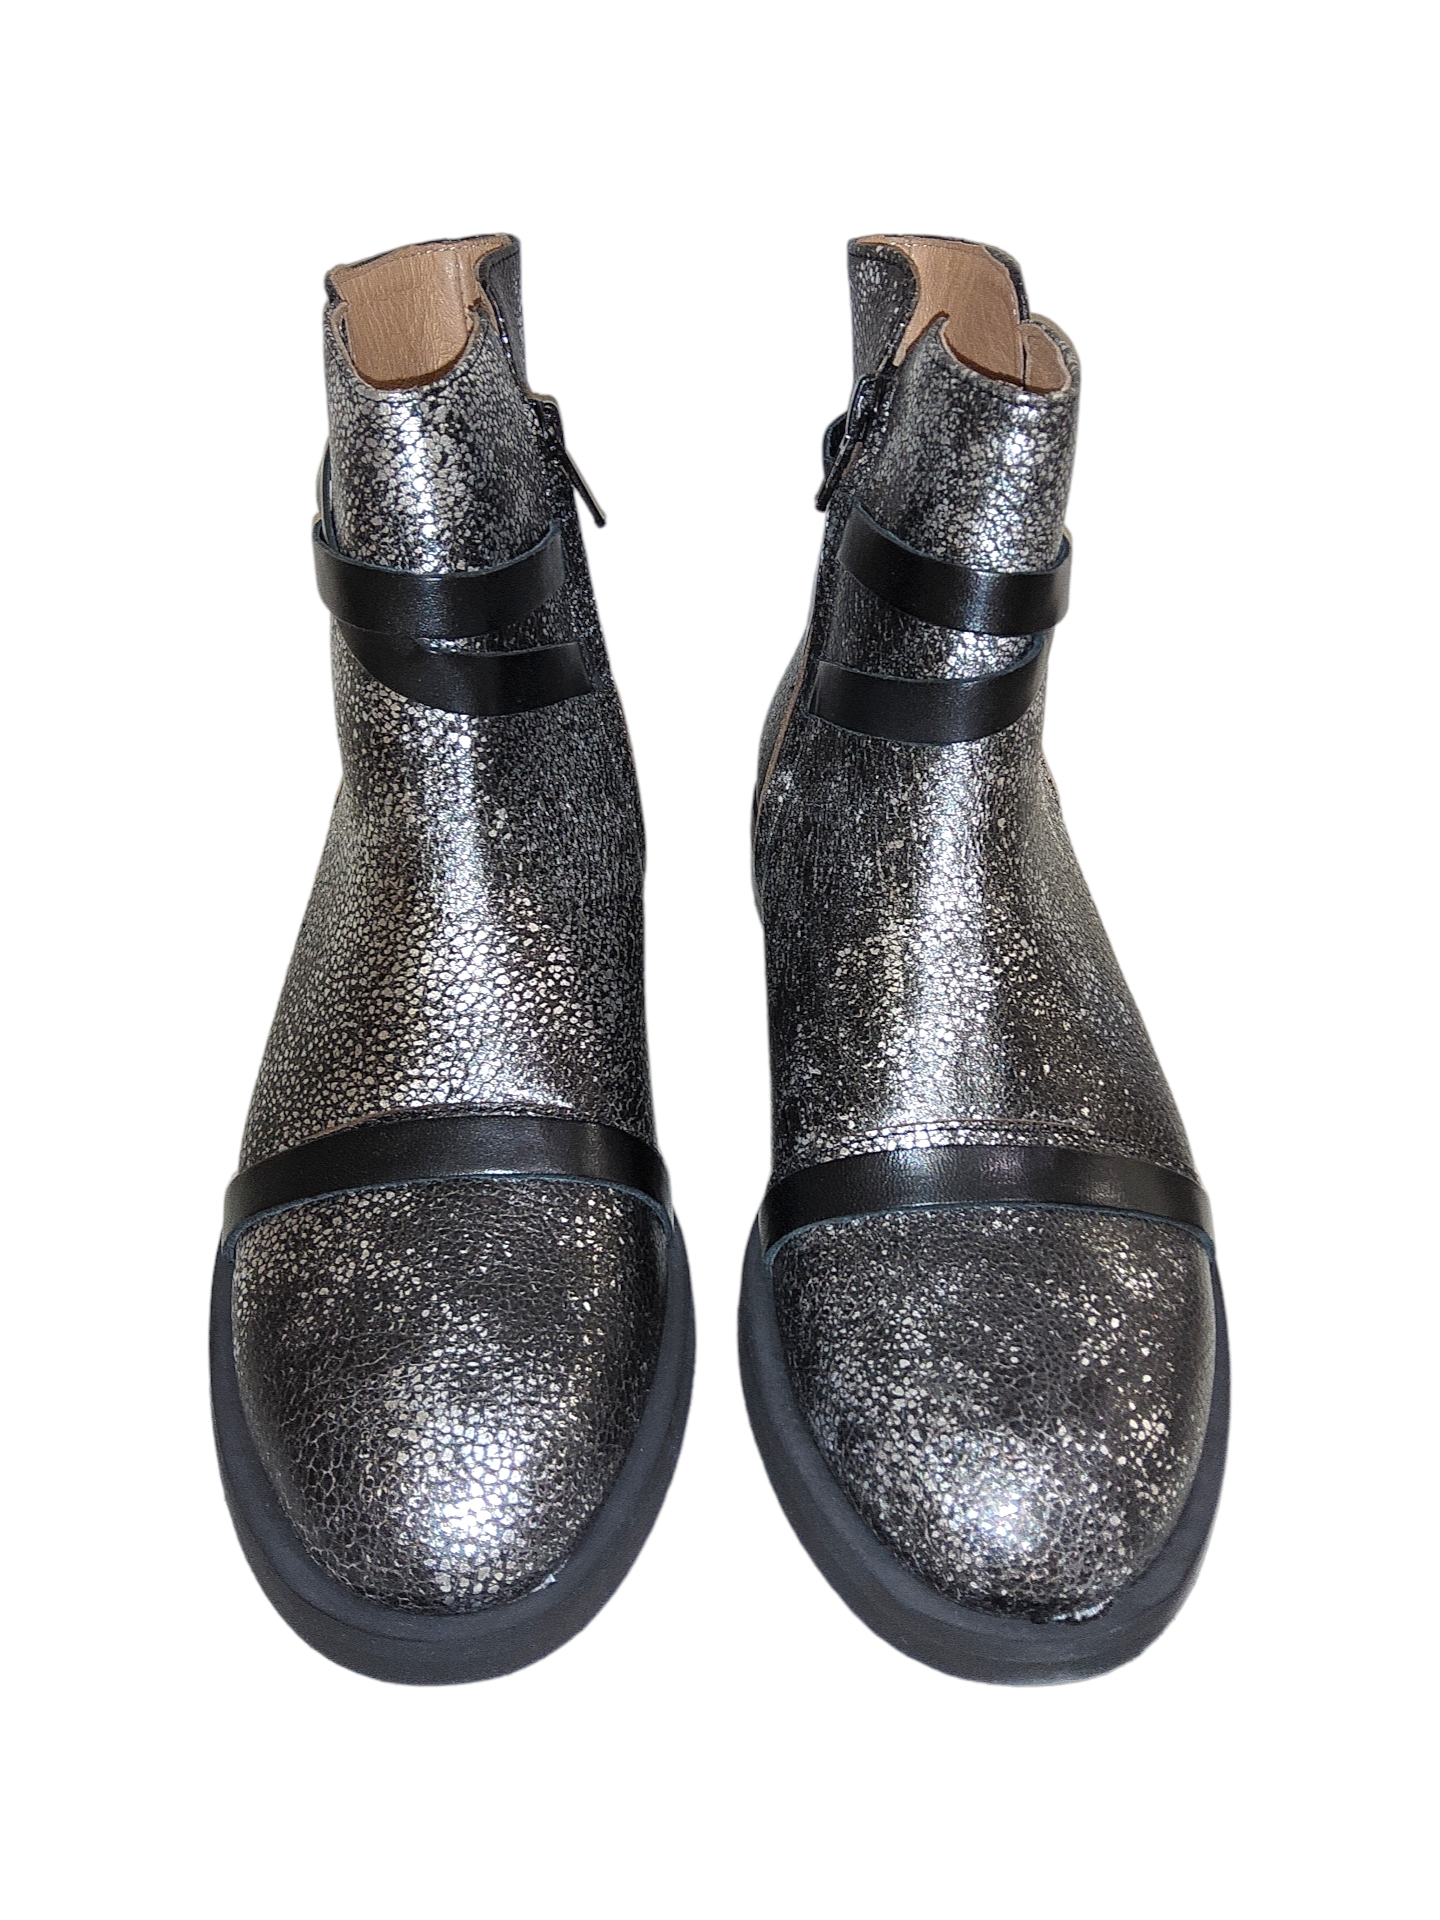 Gun metal leather ankle boot